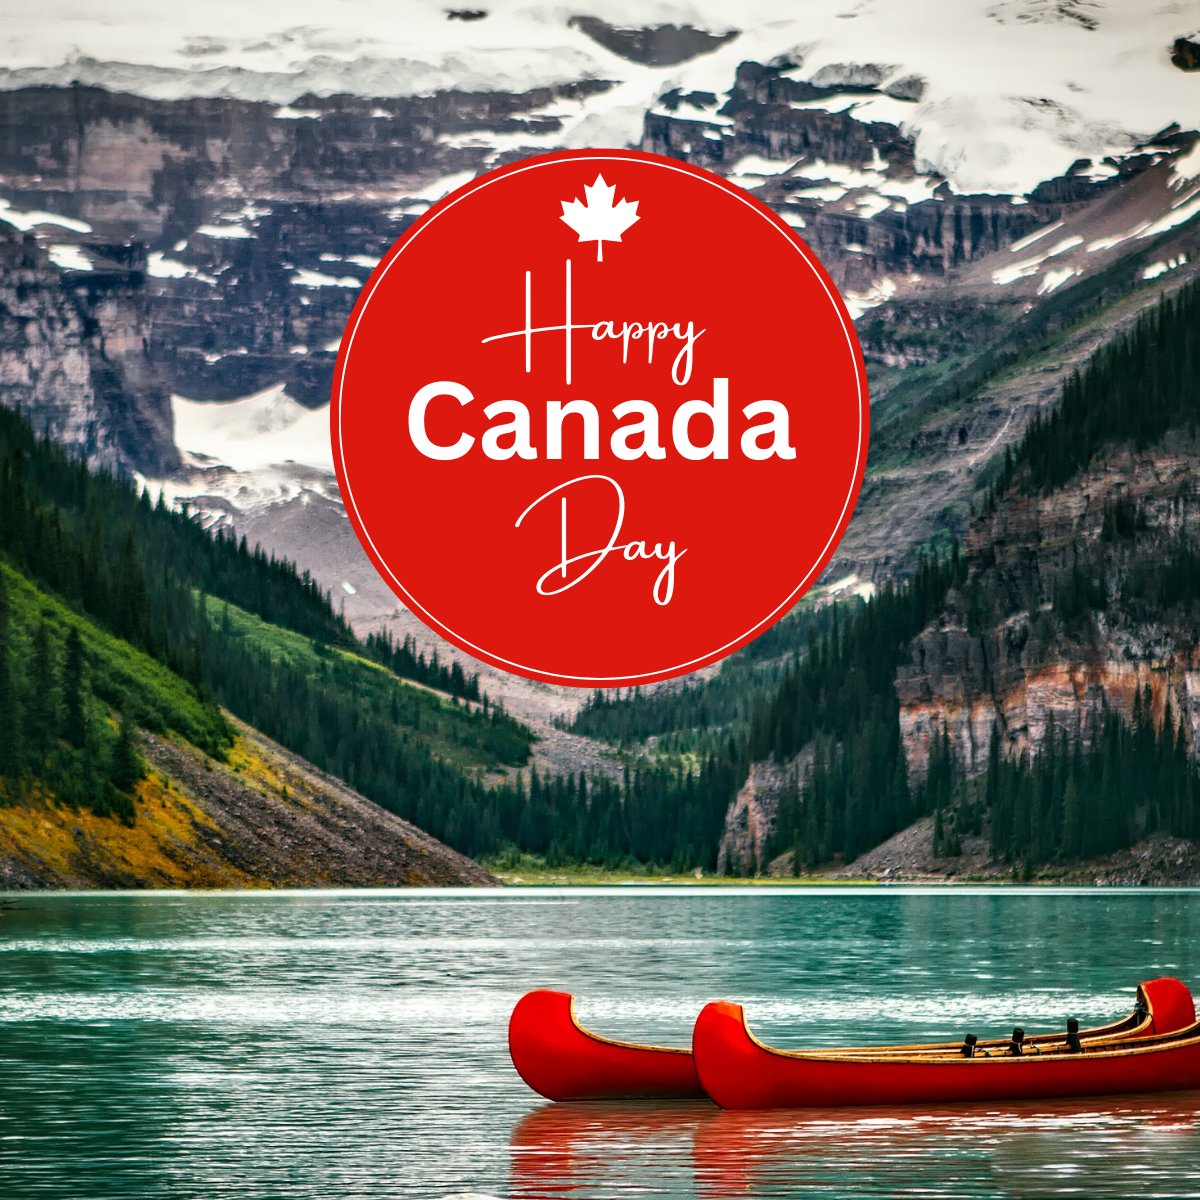 From coast to coast, let's embrace the beauty and diversity of our great nation. Happy Canada Day! 🌊🏔️
.
.
.
#CanadaDay #CoastToCoast #CanadaDay2023 #UnityInDiversity #TrueNorthStrongAndFree #MaplePride #OhCanada
#torontorealestate #torontocanada #canadarealestate